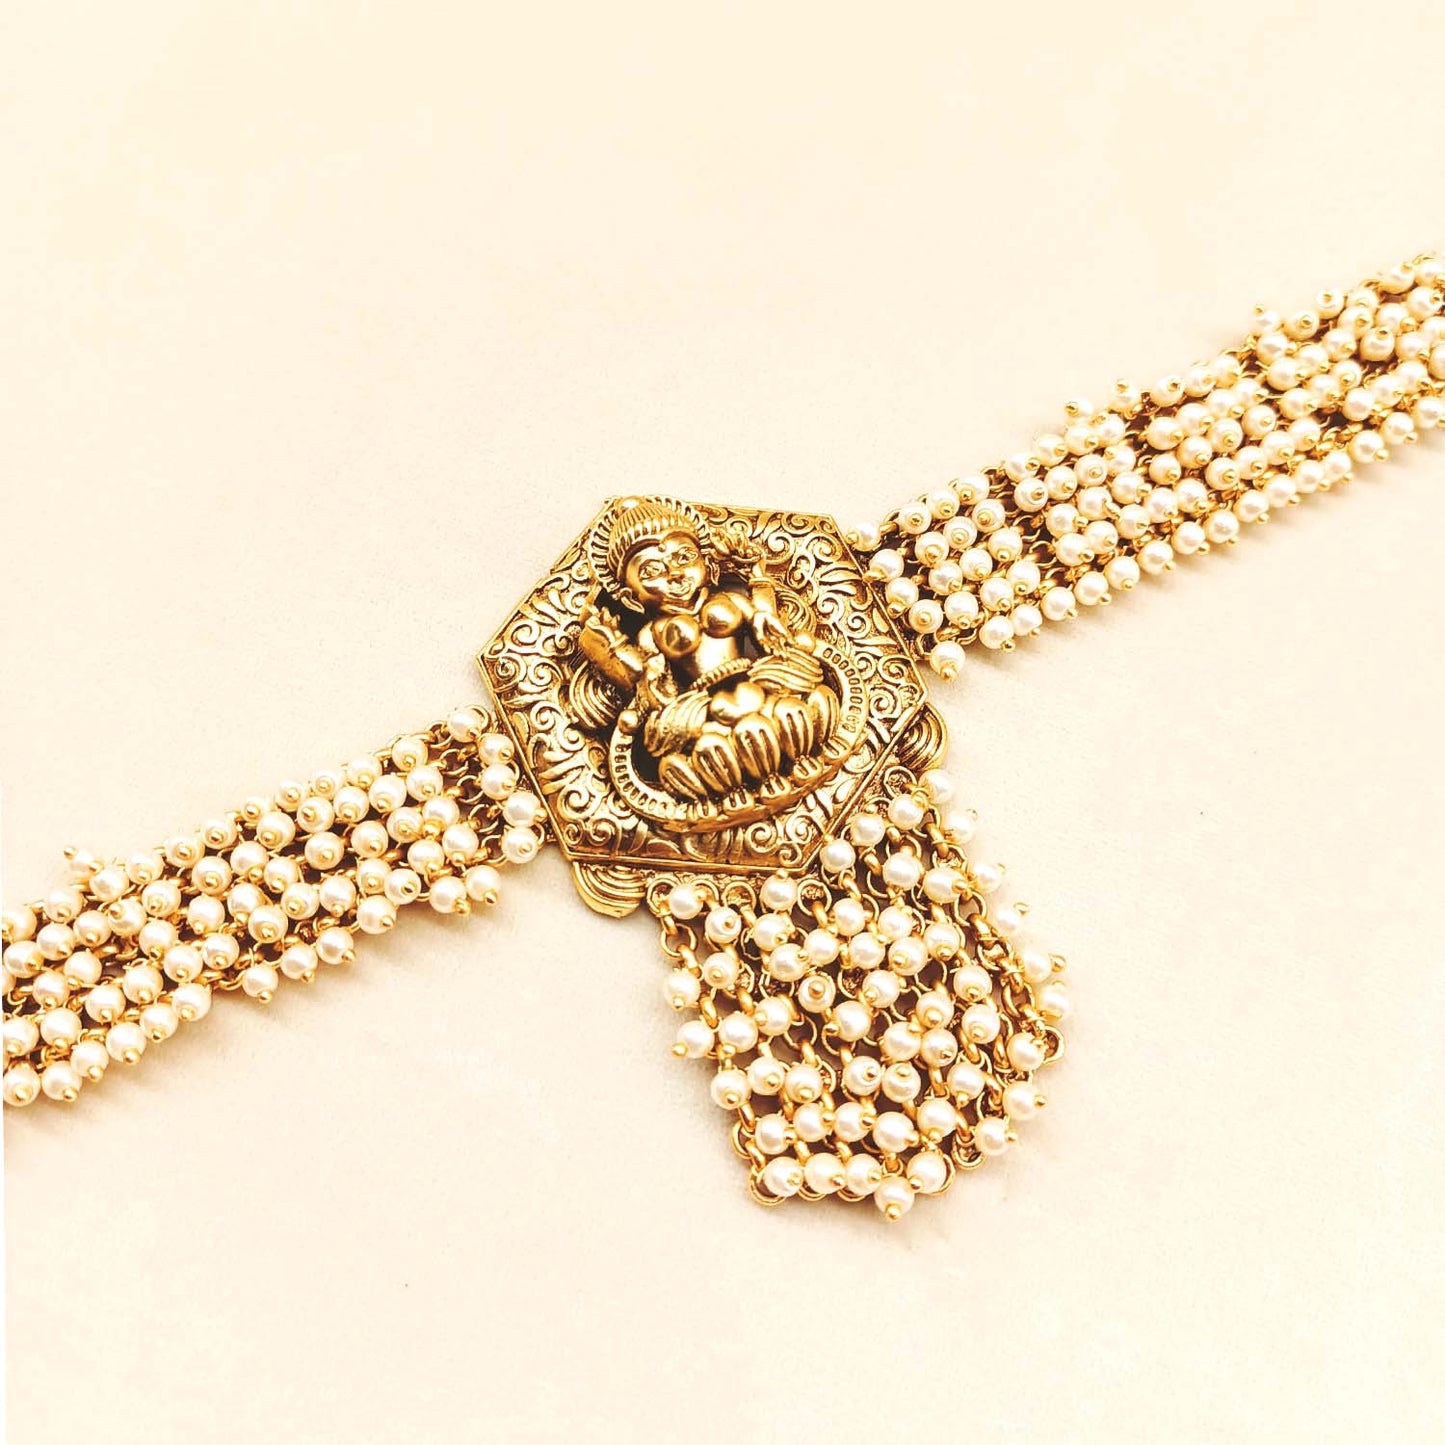 Twinkle Beads Work Gold Plated Temple Waist Belt